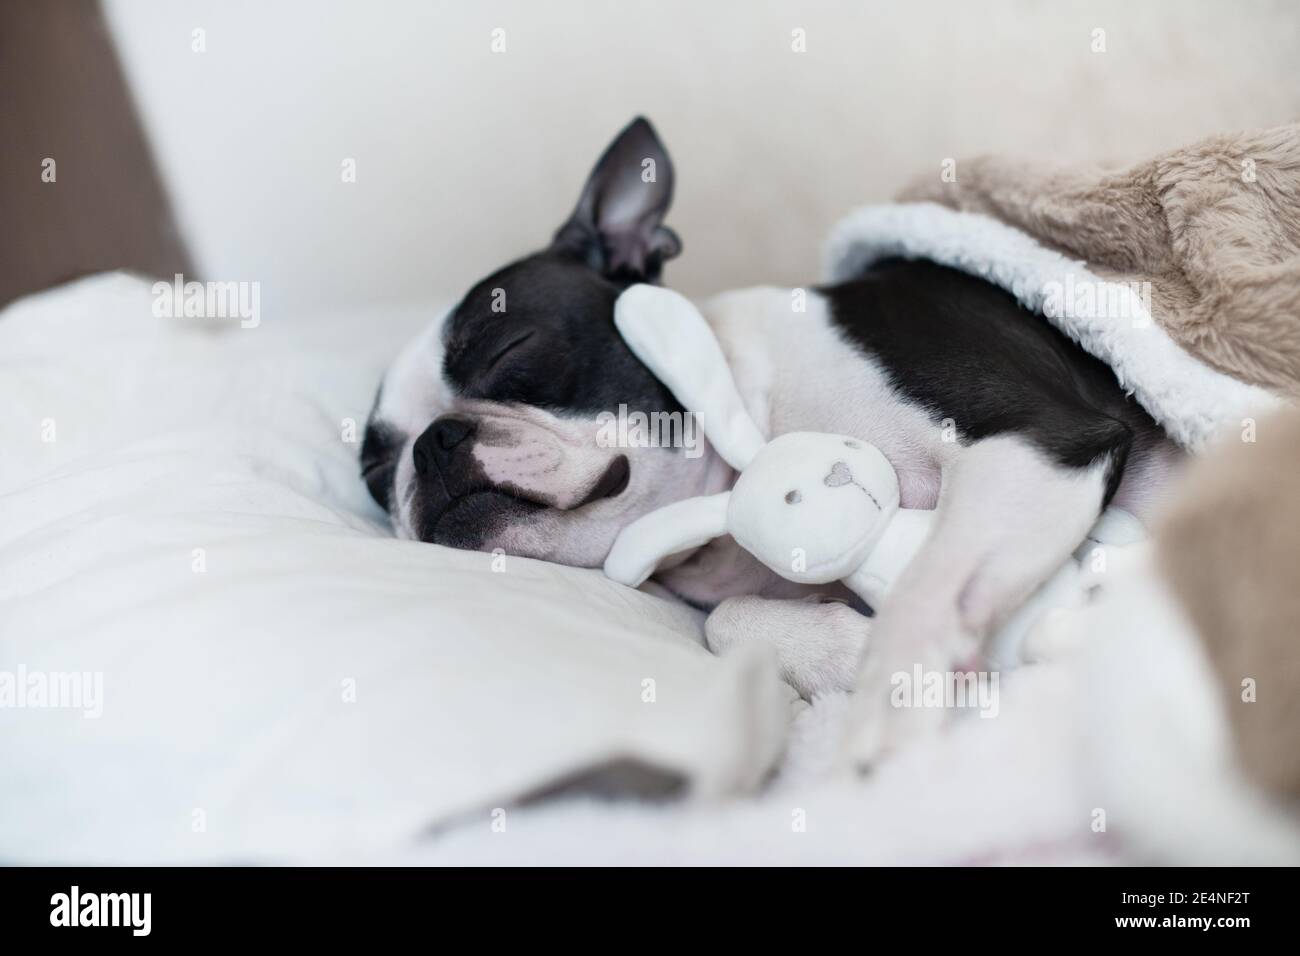 A young funny pet dog Boston Terrier with pleasure sleeps with his favorite toy - a white soft bunny in the bed under the blanket. Stock Photo